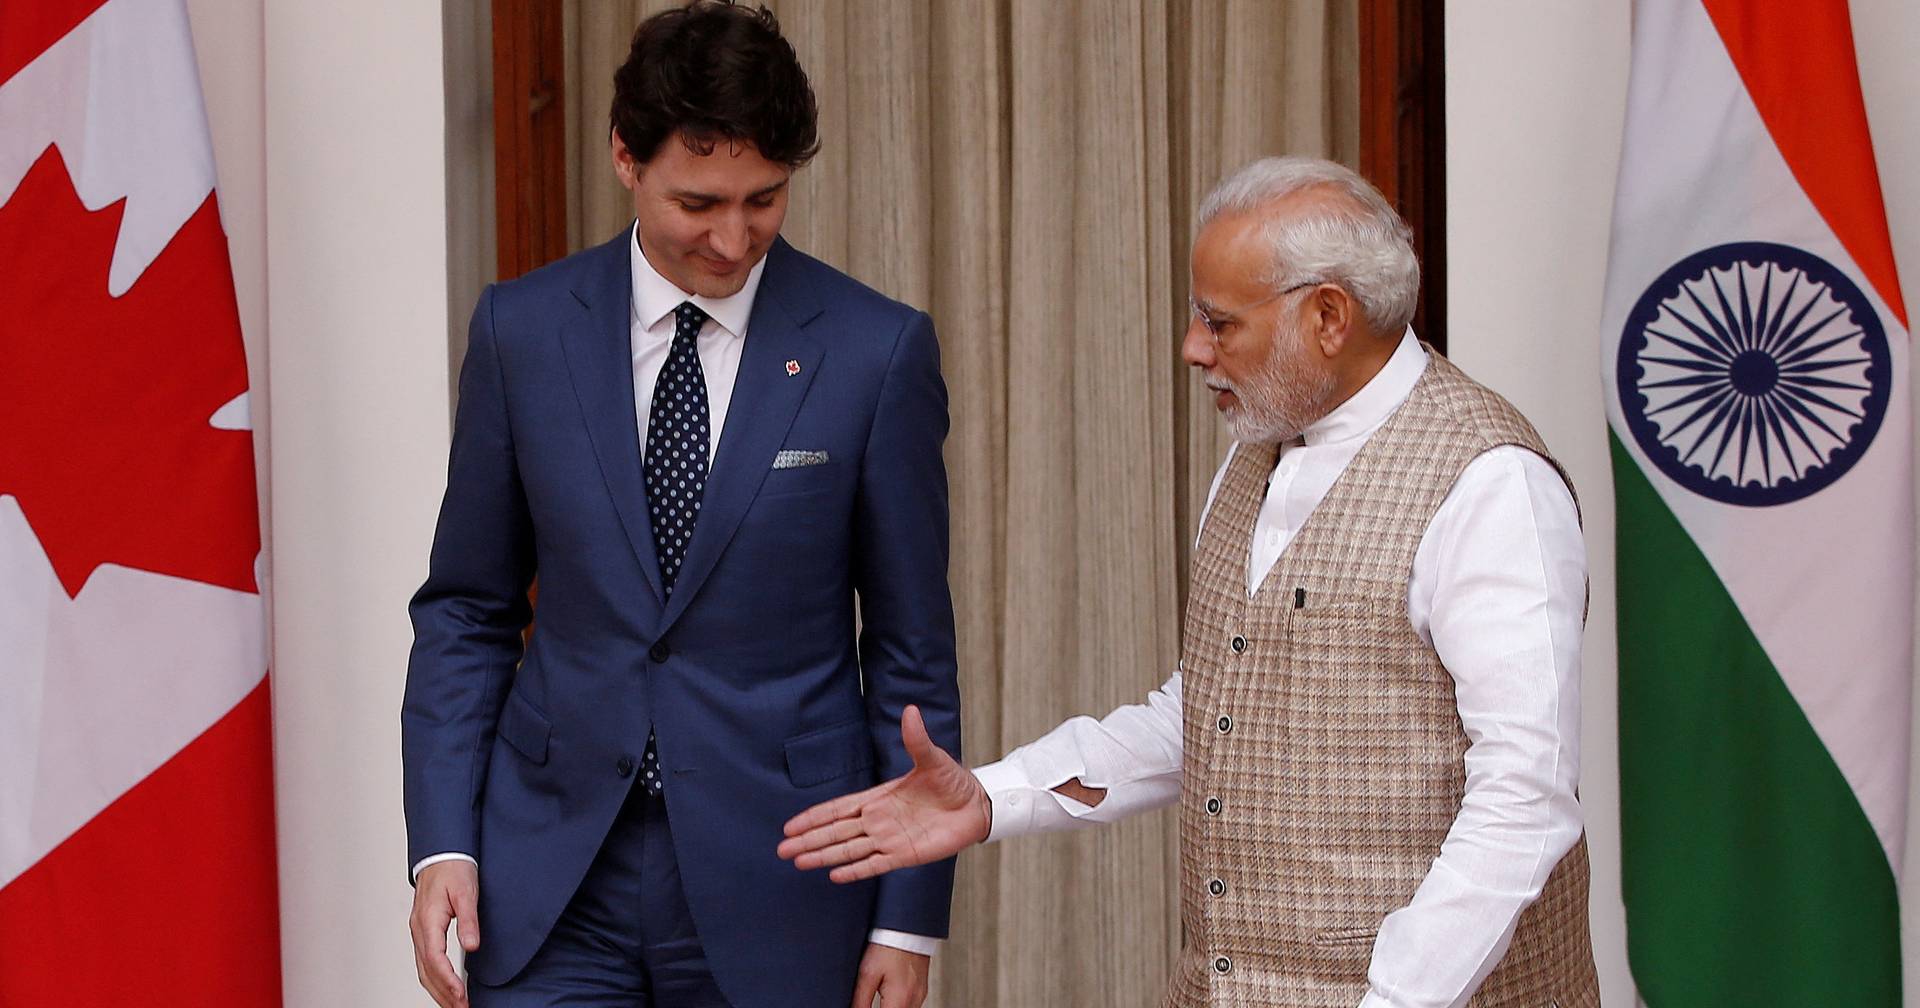 India wants Canada to withdraw about 40 of its diplomats from the country by next week